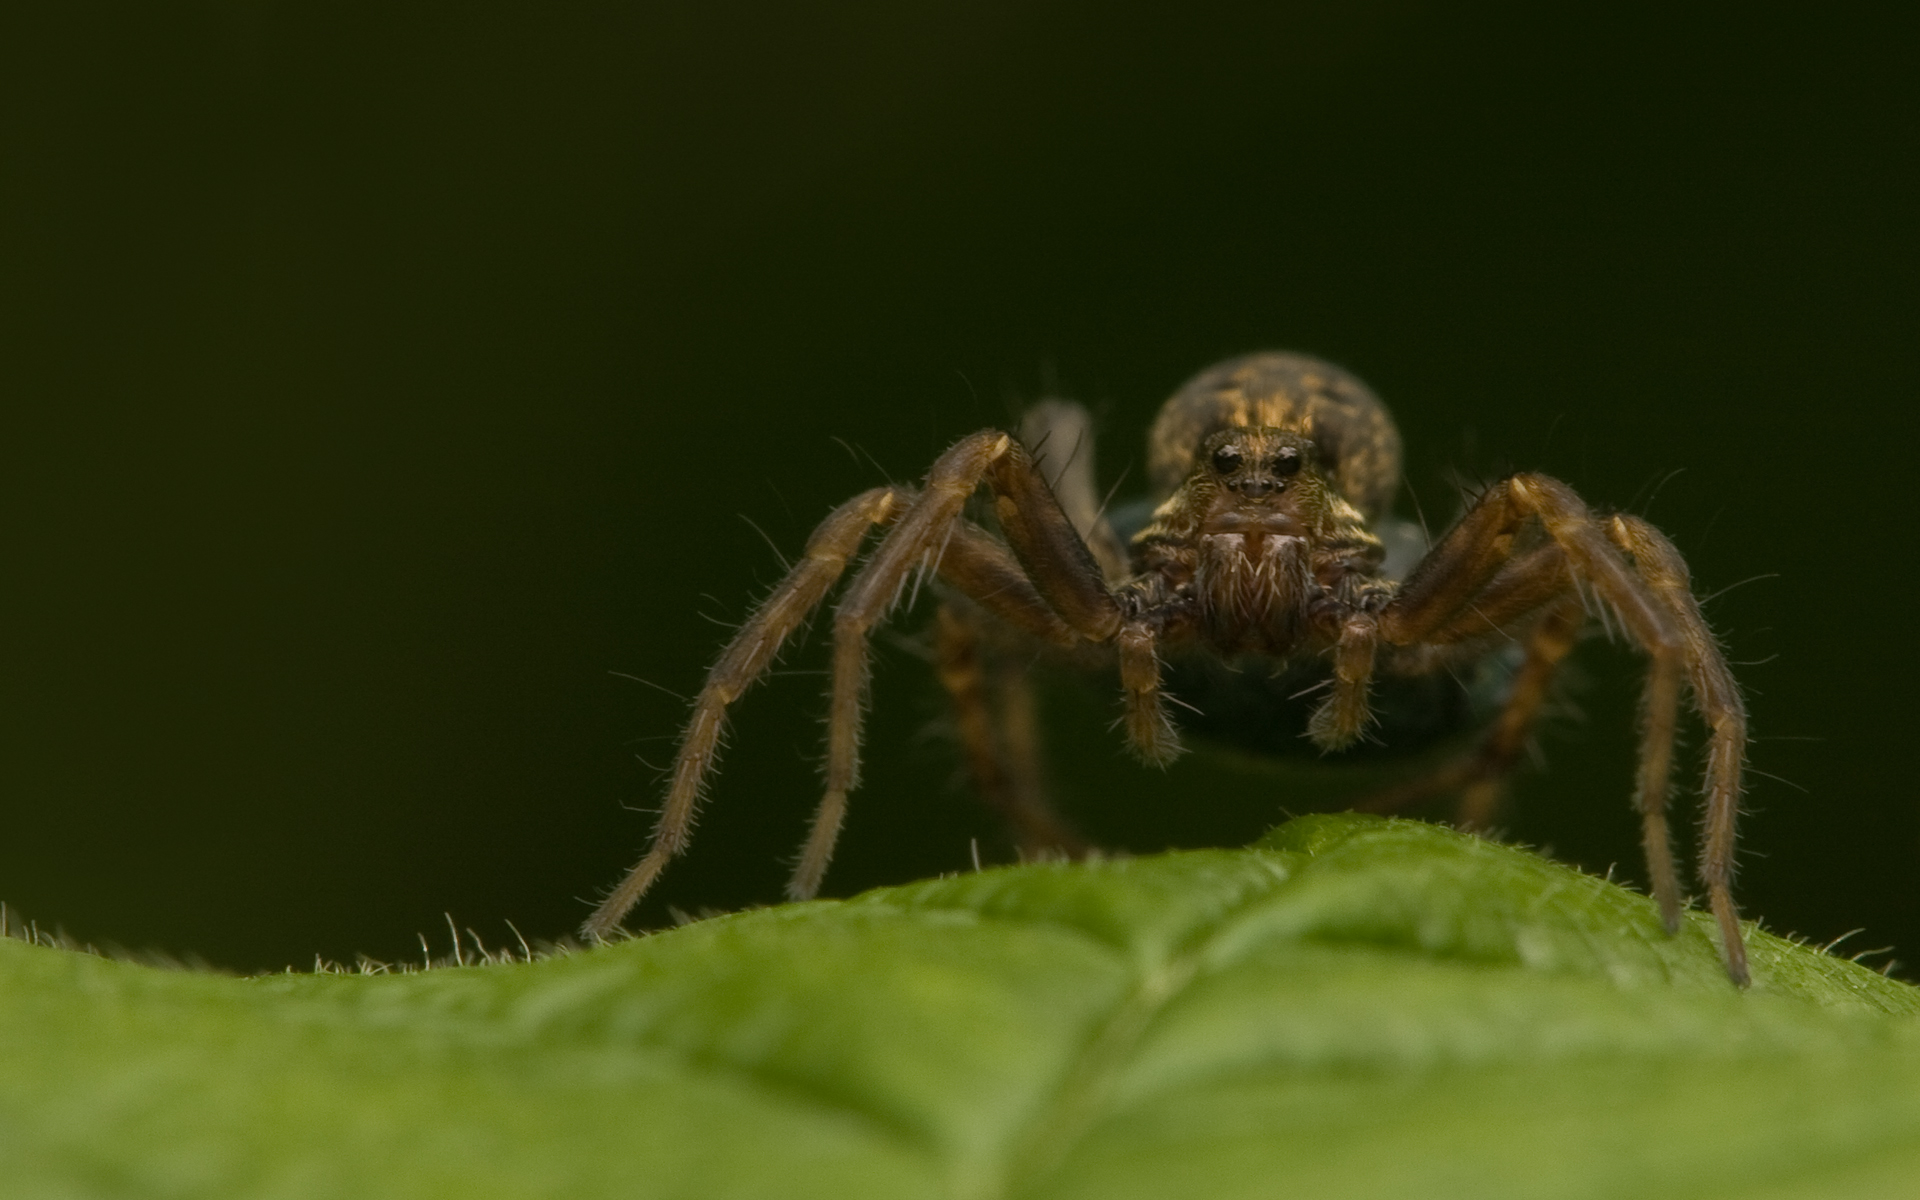 An unknown wolf spider on a green leaf